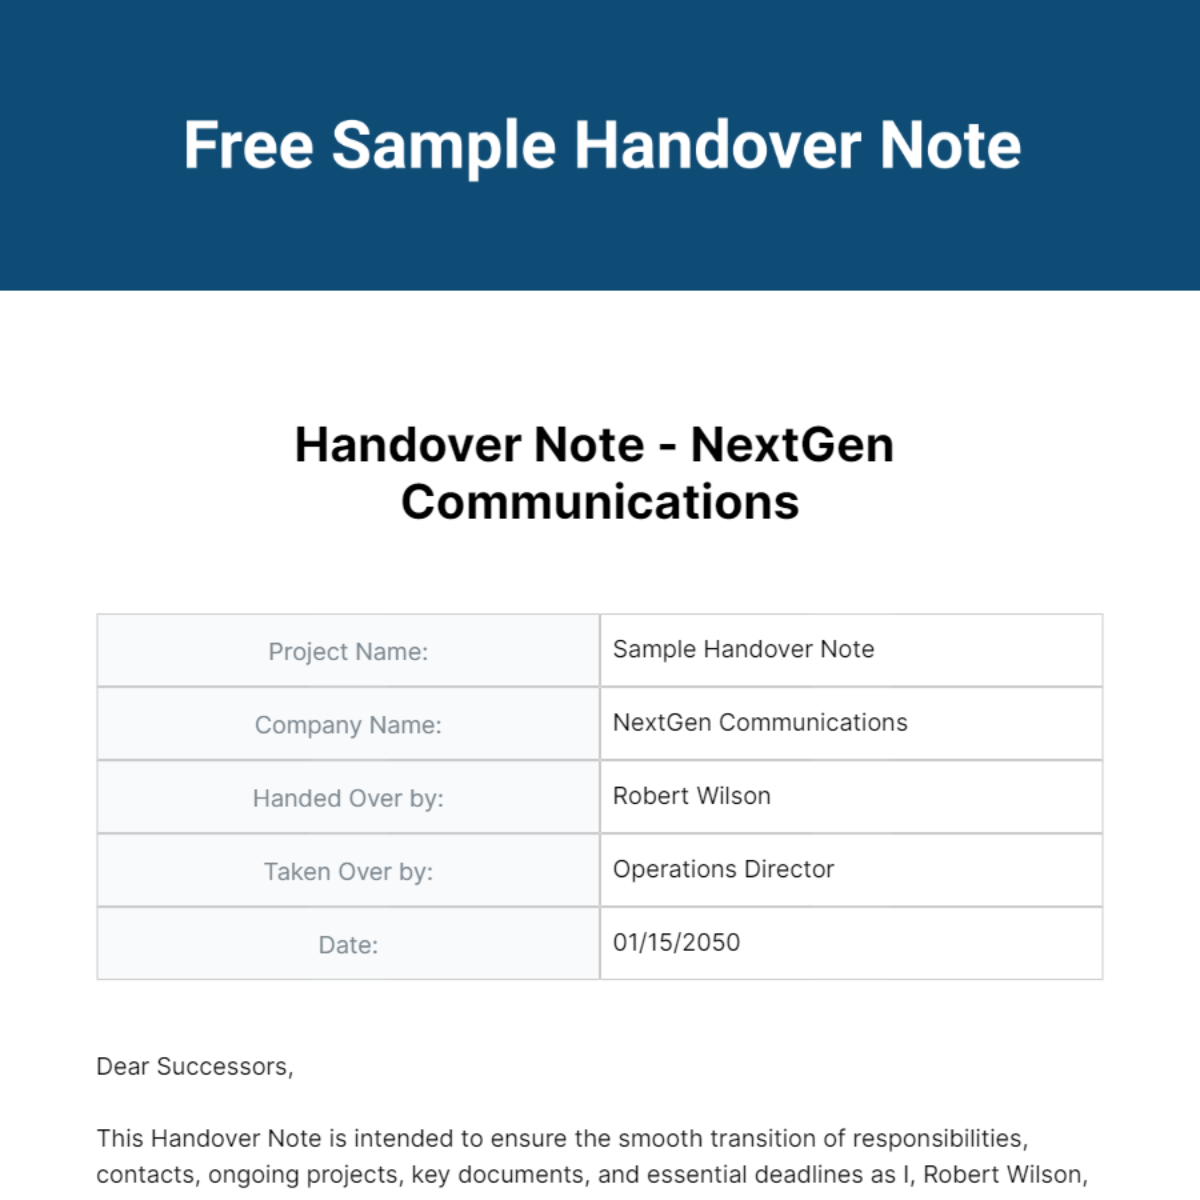 Free Sample Handover Note Template